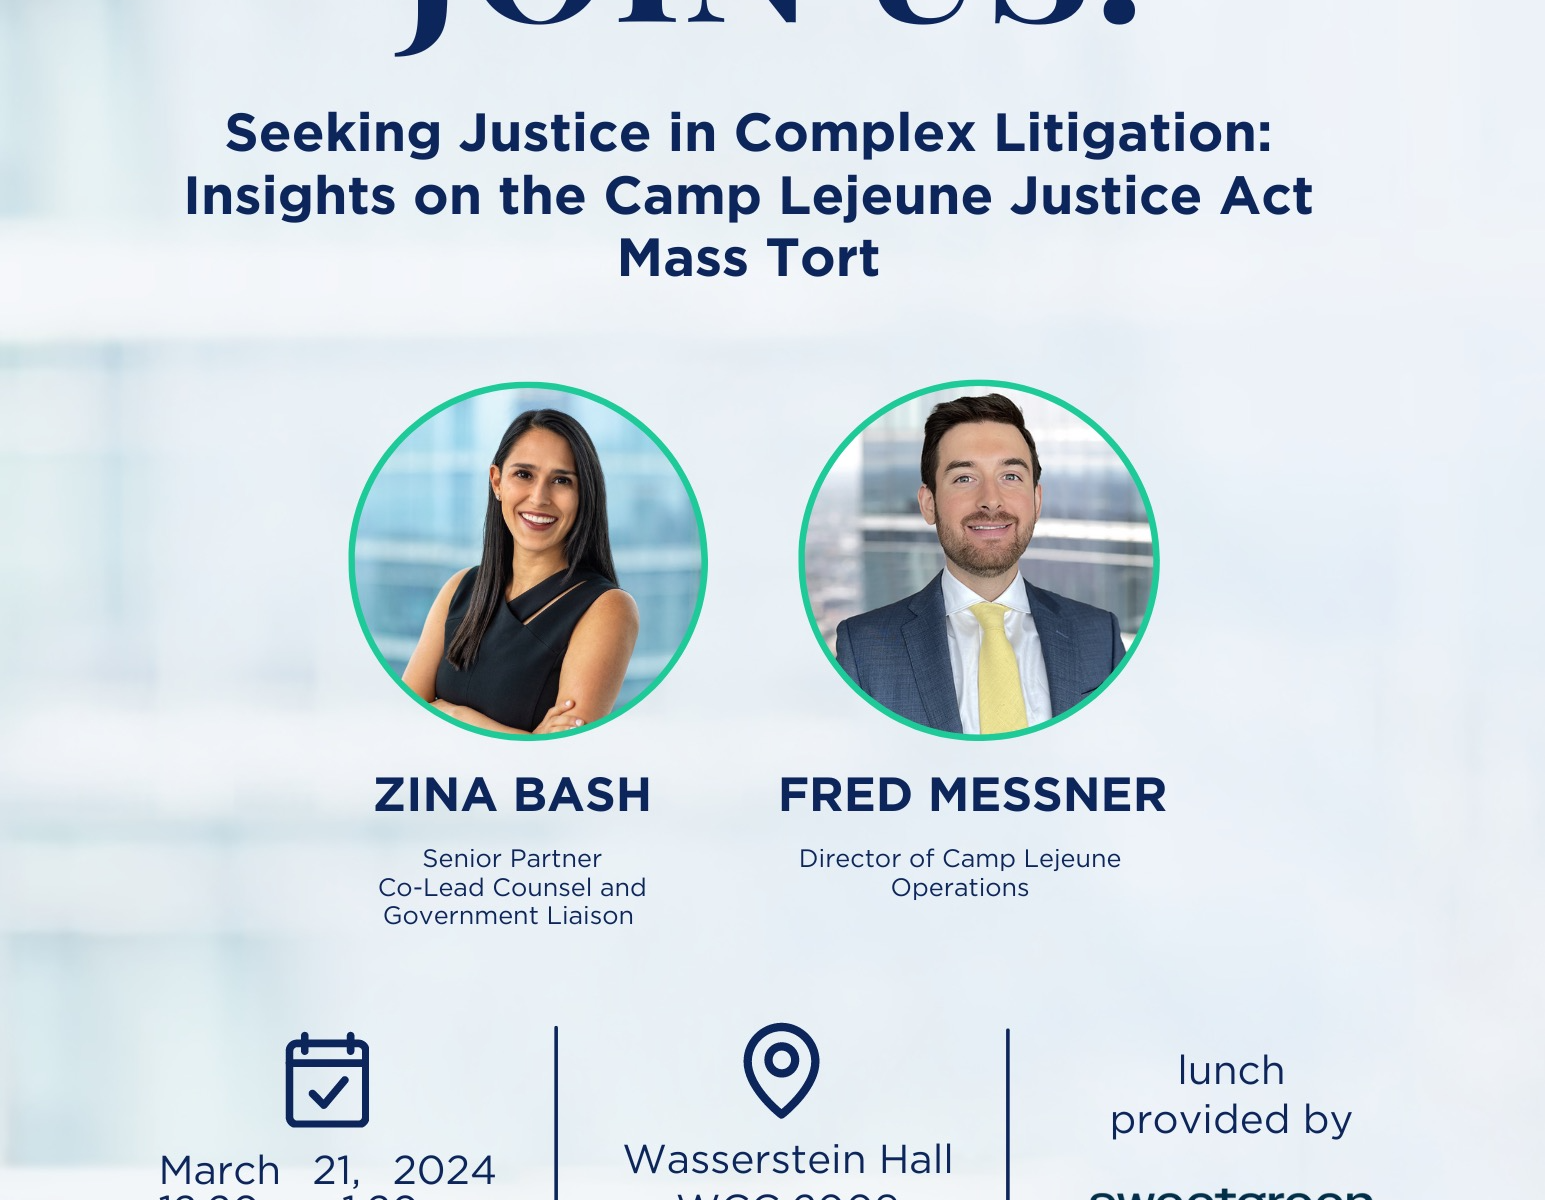 JOIN US! Seeking Justice in Complex Litigation: Insights on the Camp Lejeune Justice Act Mass Tort with Keller Postman Zina Bash, Senior Partner, Co-lead counsel and government liason Fred Messner, Director of Camp Lejune Operations